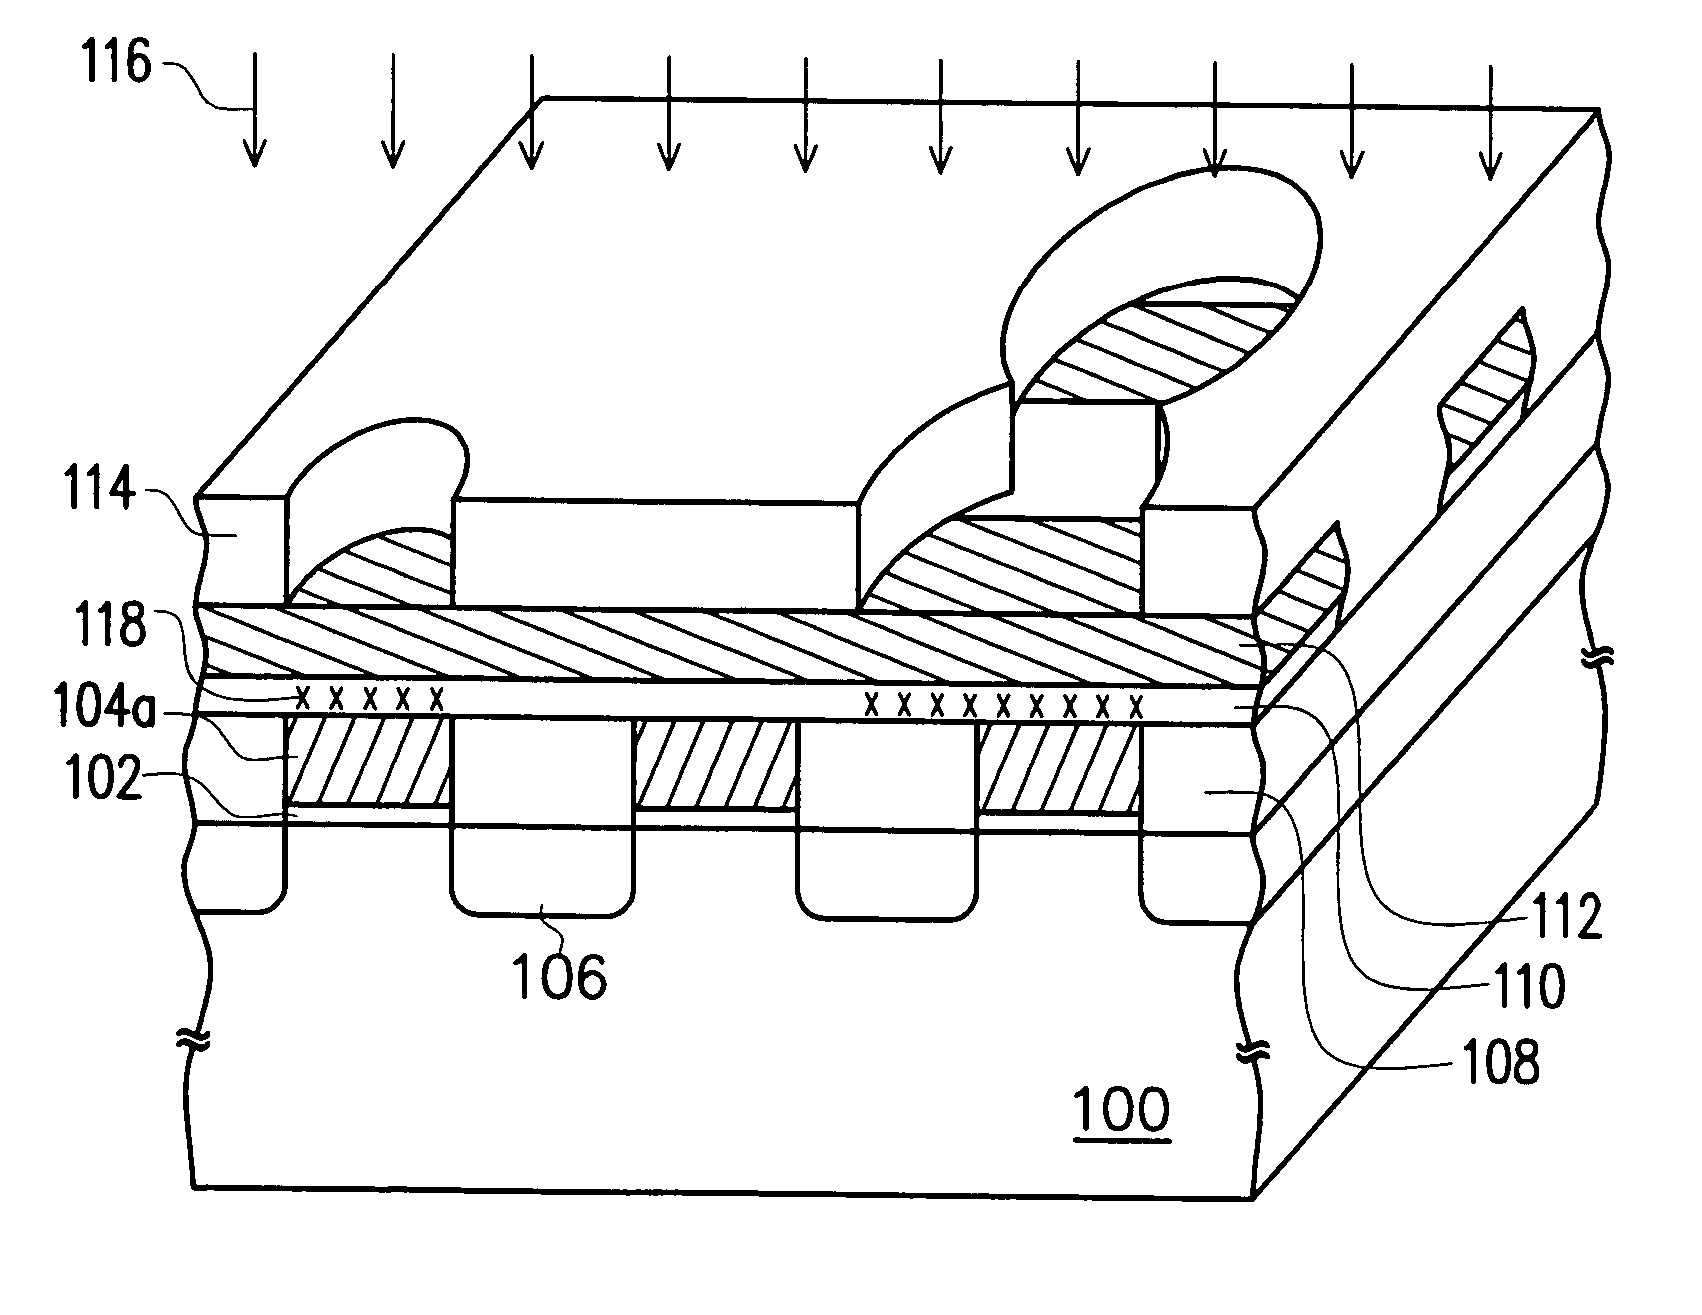 Mask ROM and fabrication thereof